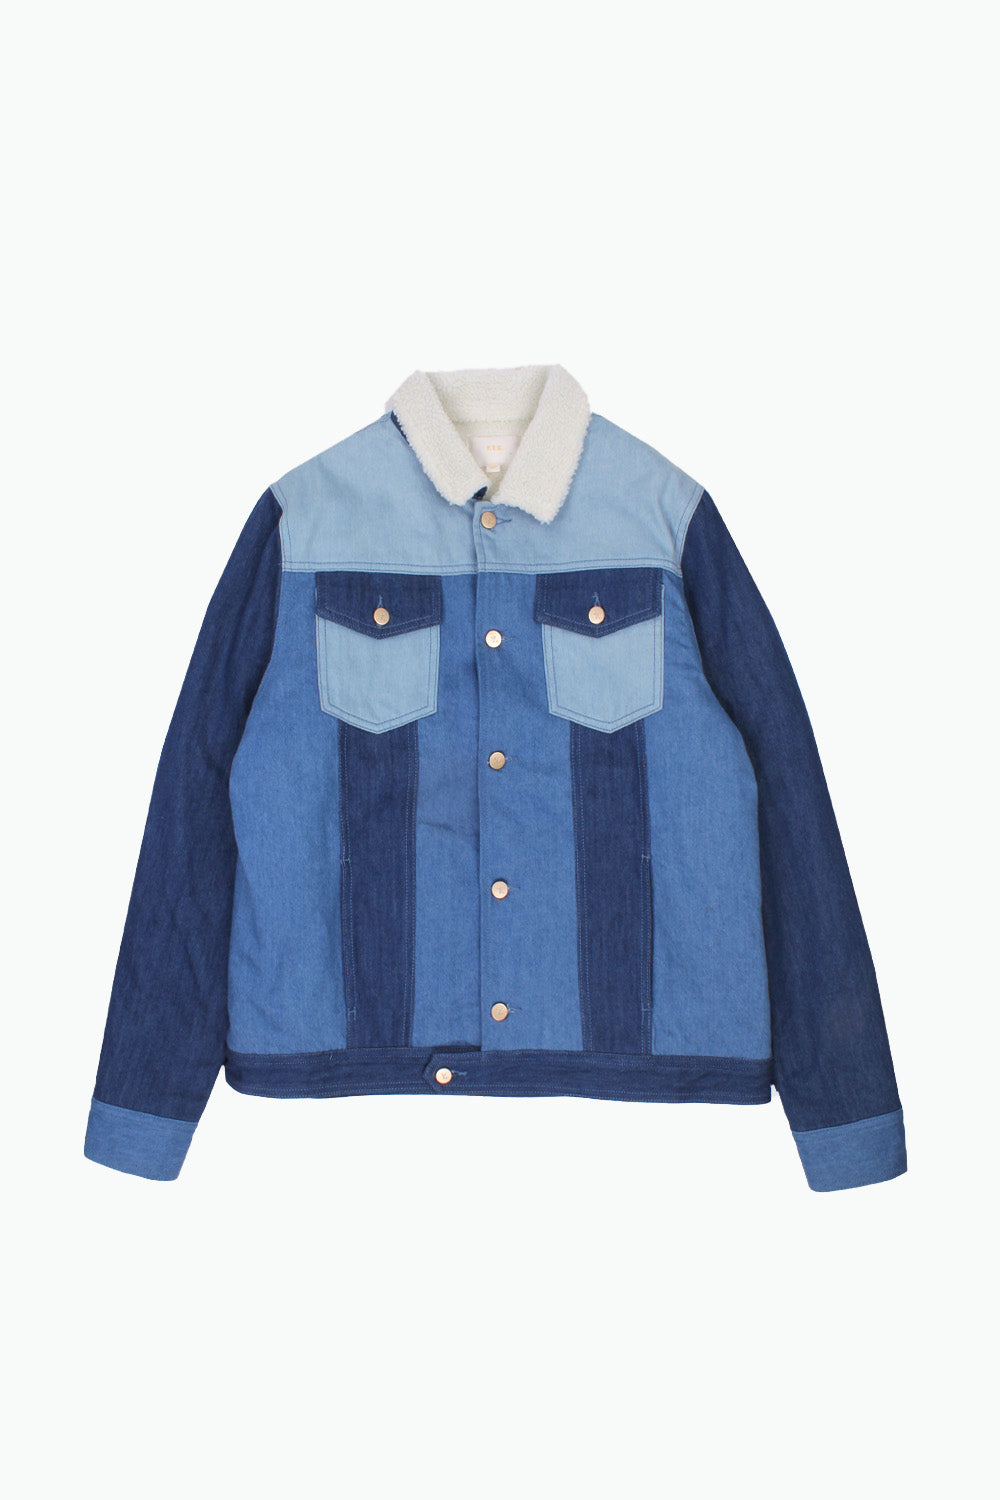 Out West Mixed Denim Jacket